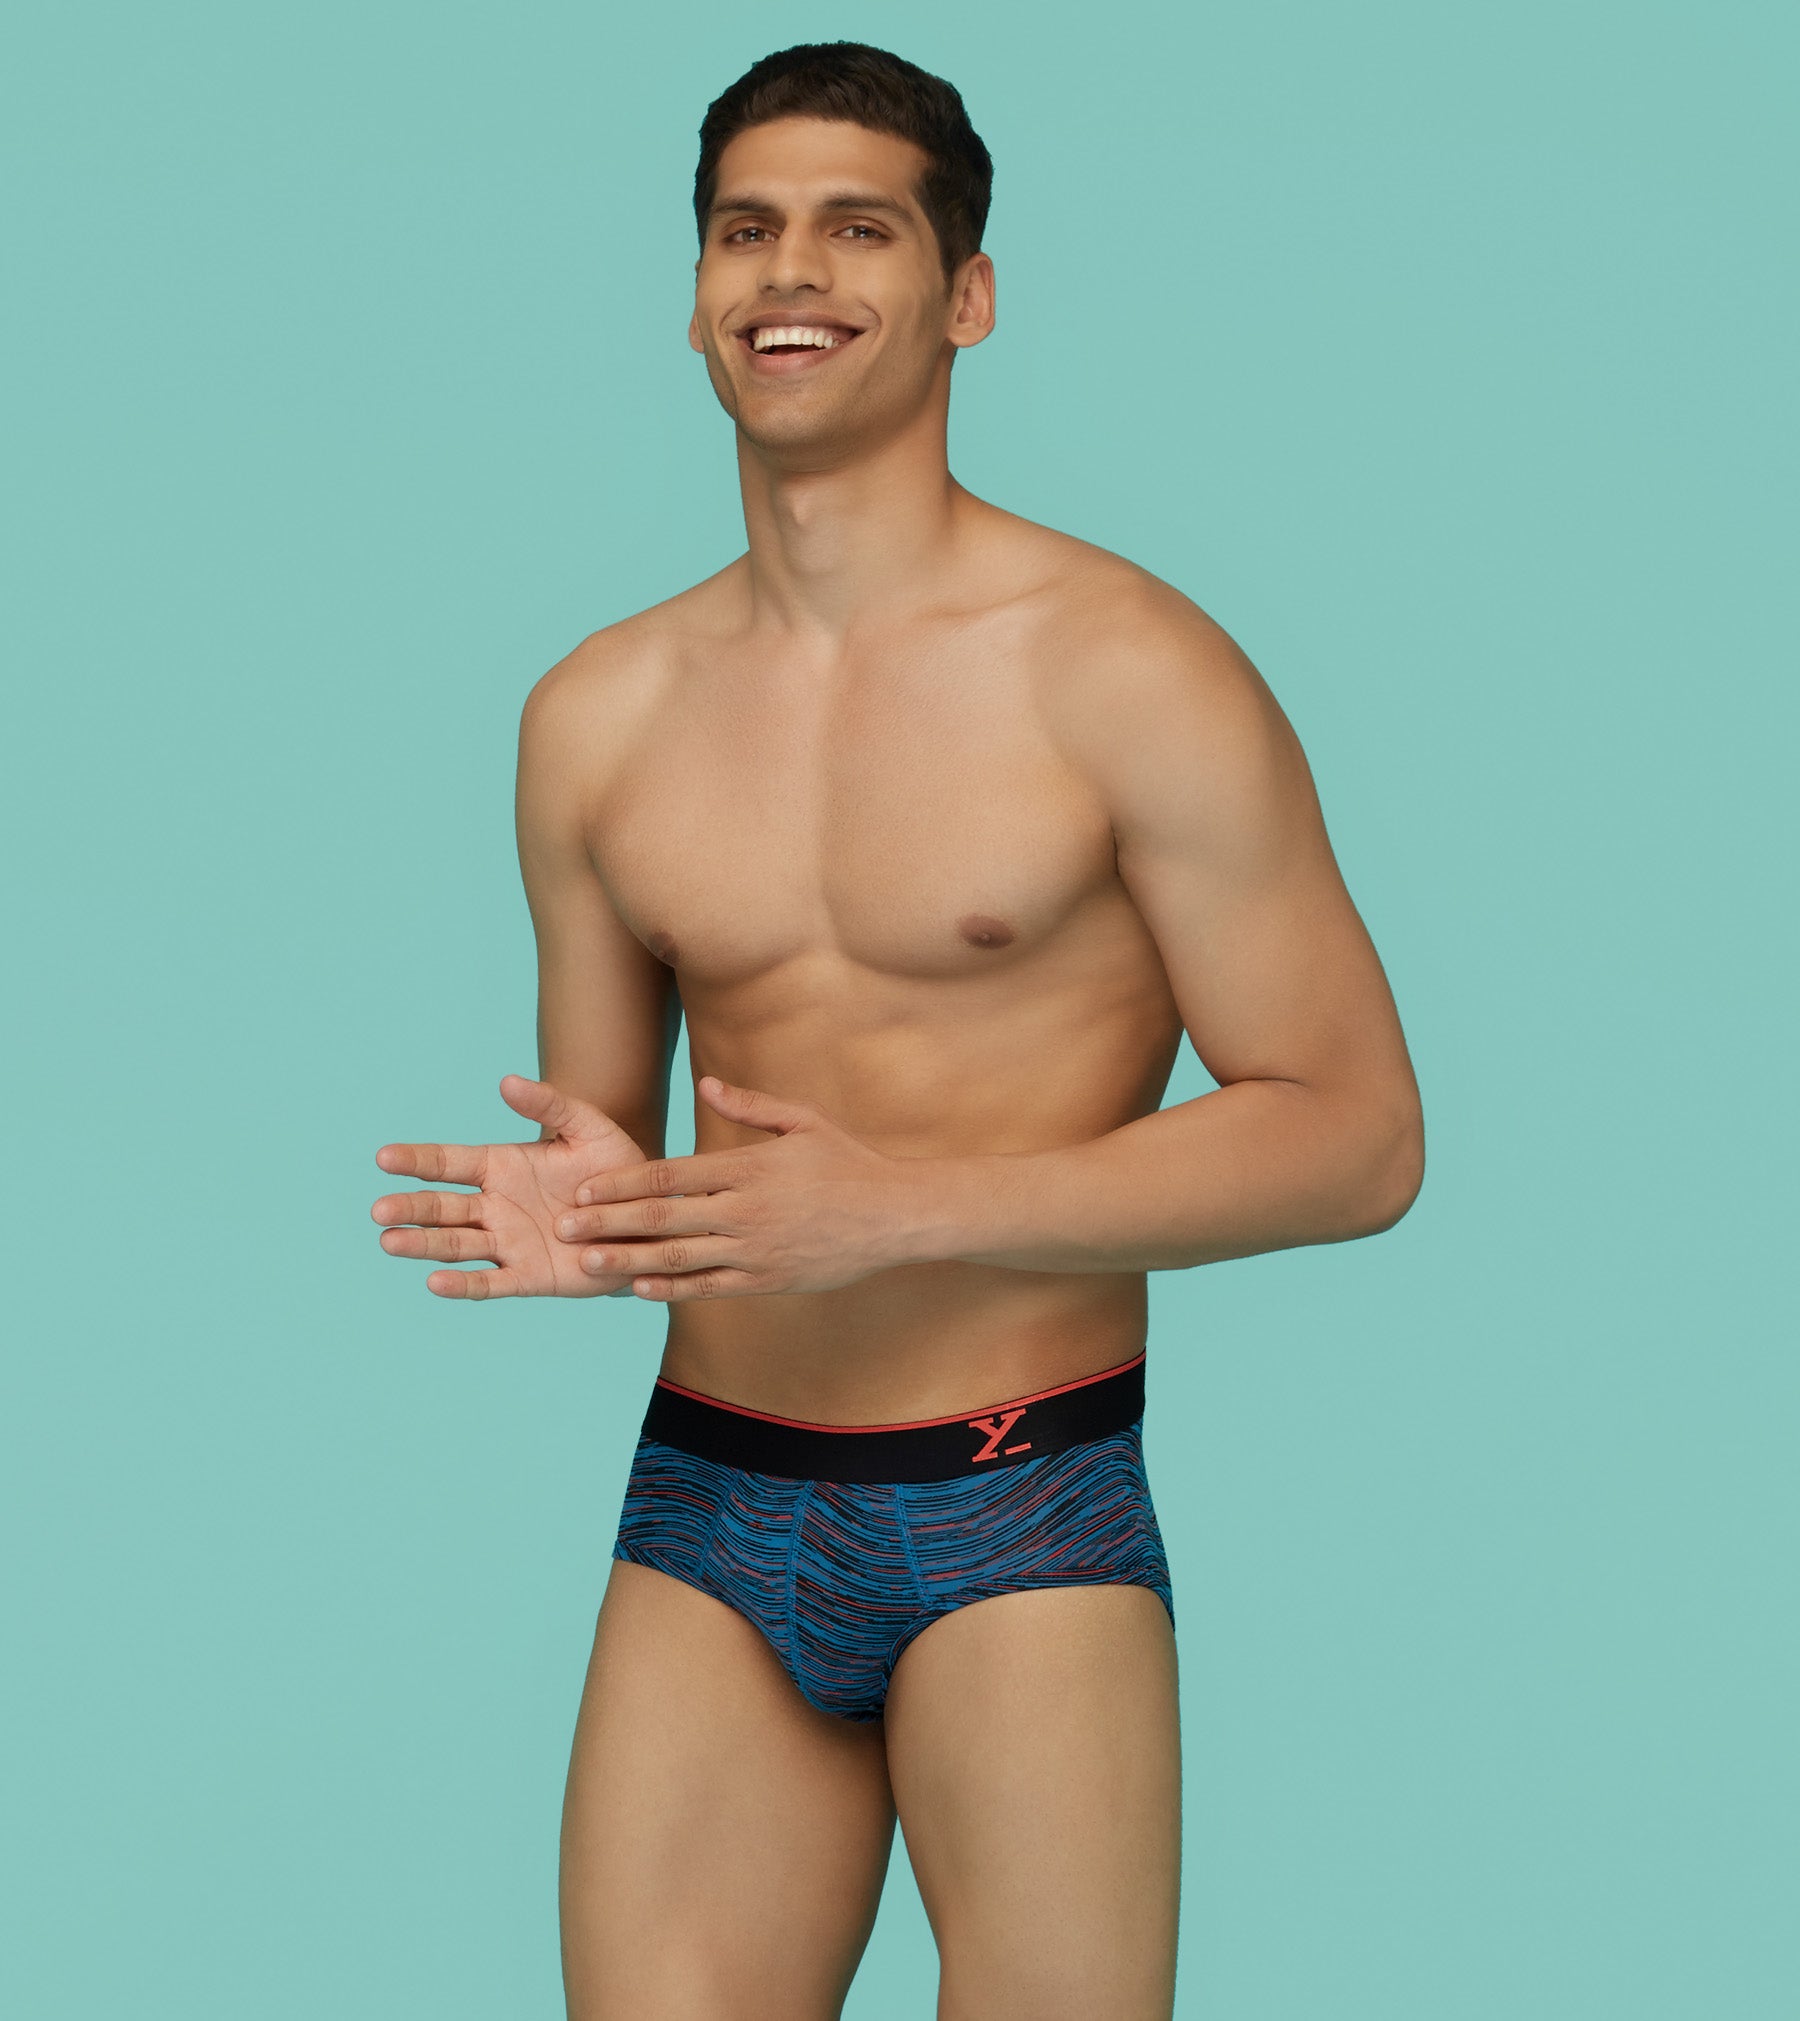 Jockey Boy's Super Combed Briefs (Assorted) (56 cm) Price - Buy Online at  Best Price in India